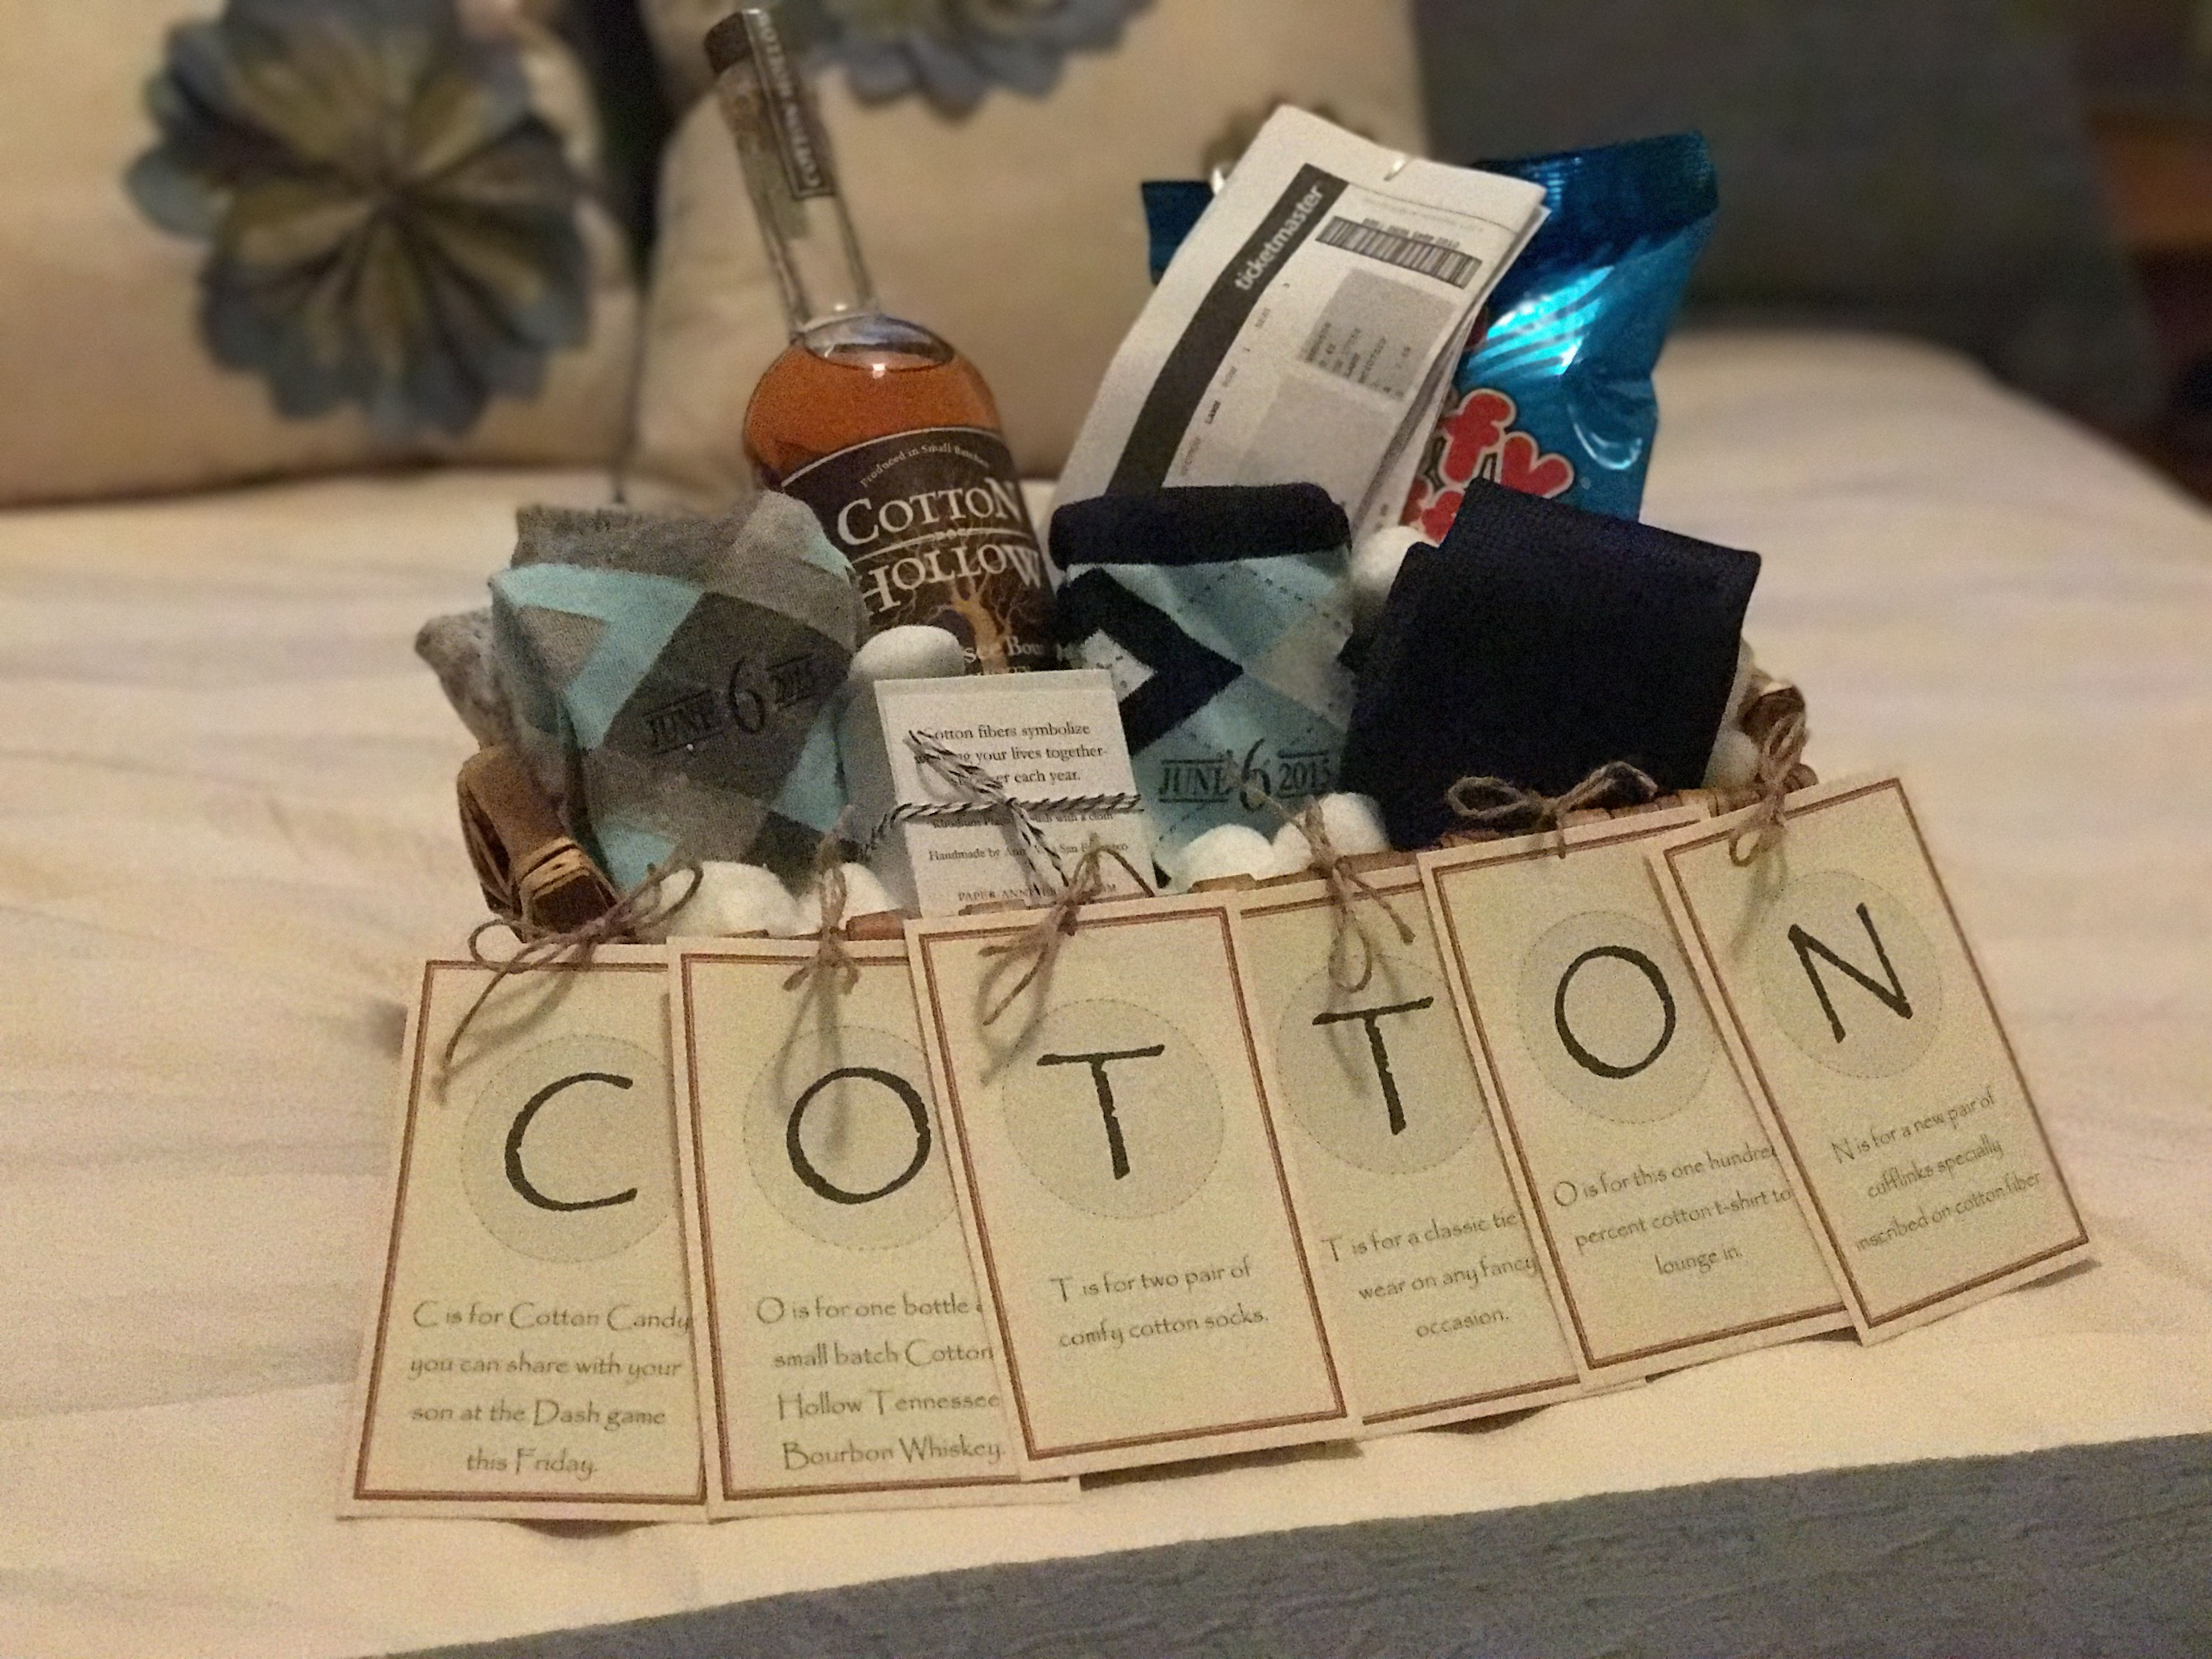 2Nd Anniversary Gift Ideas For Him
 The "Cotton" Anniversary Gift for Him